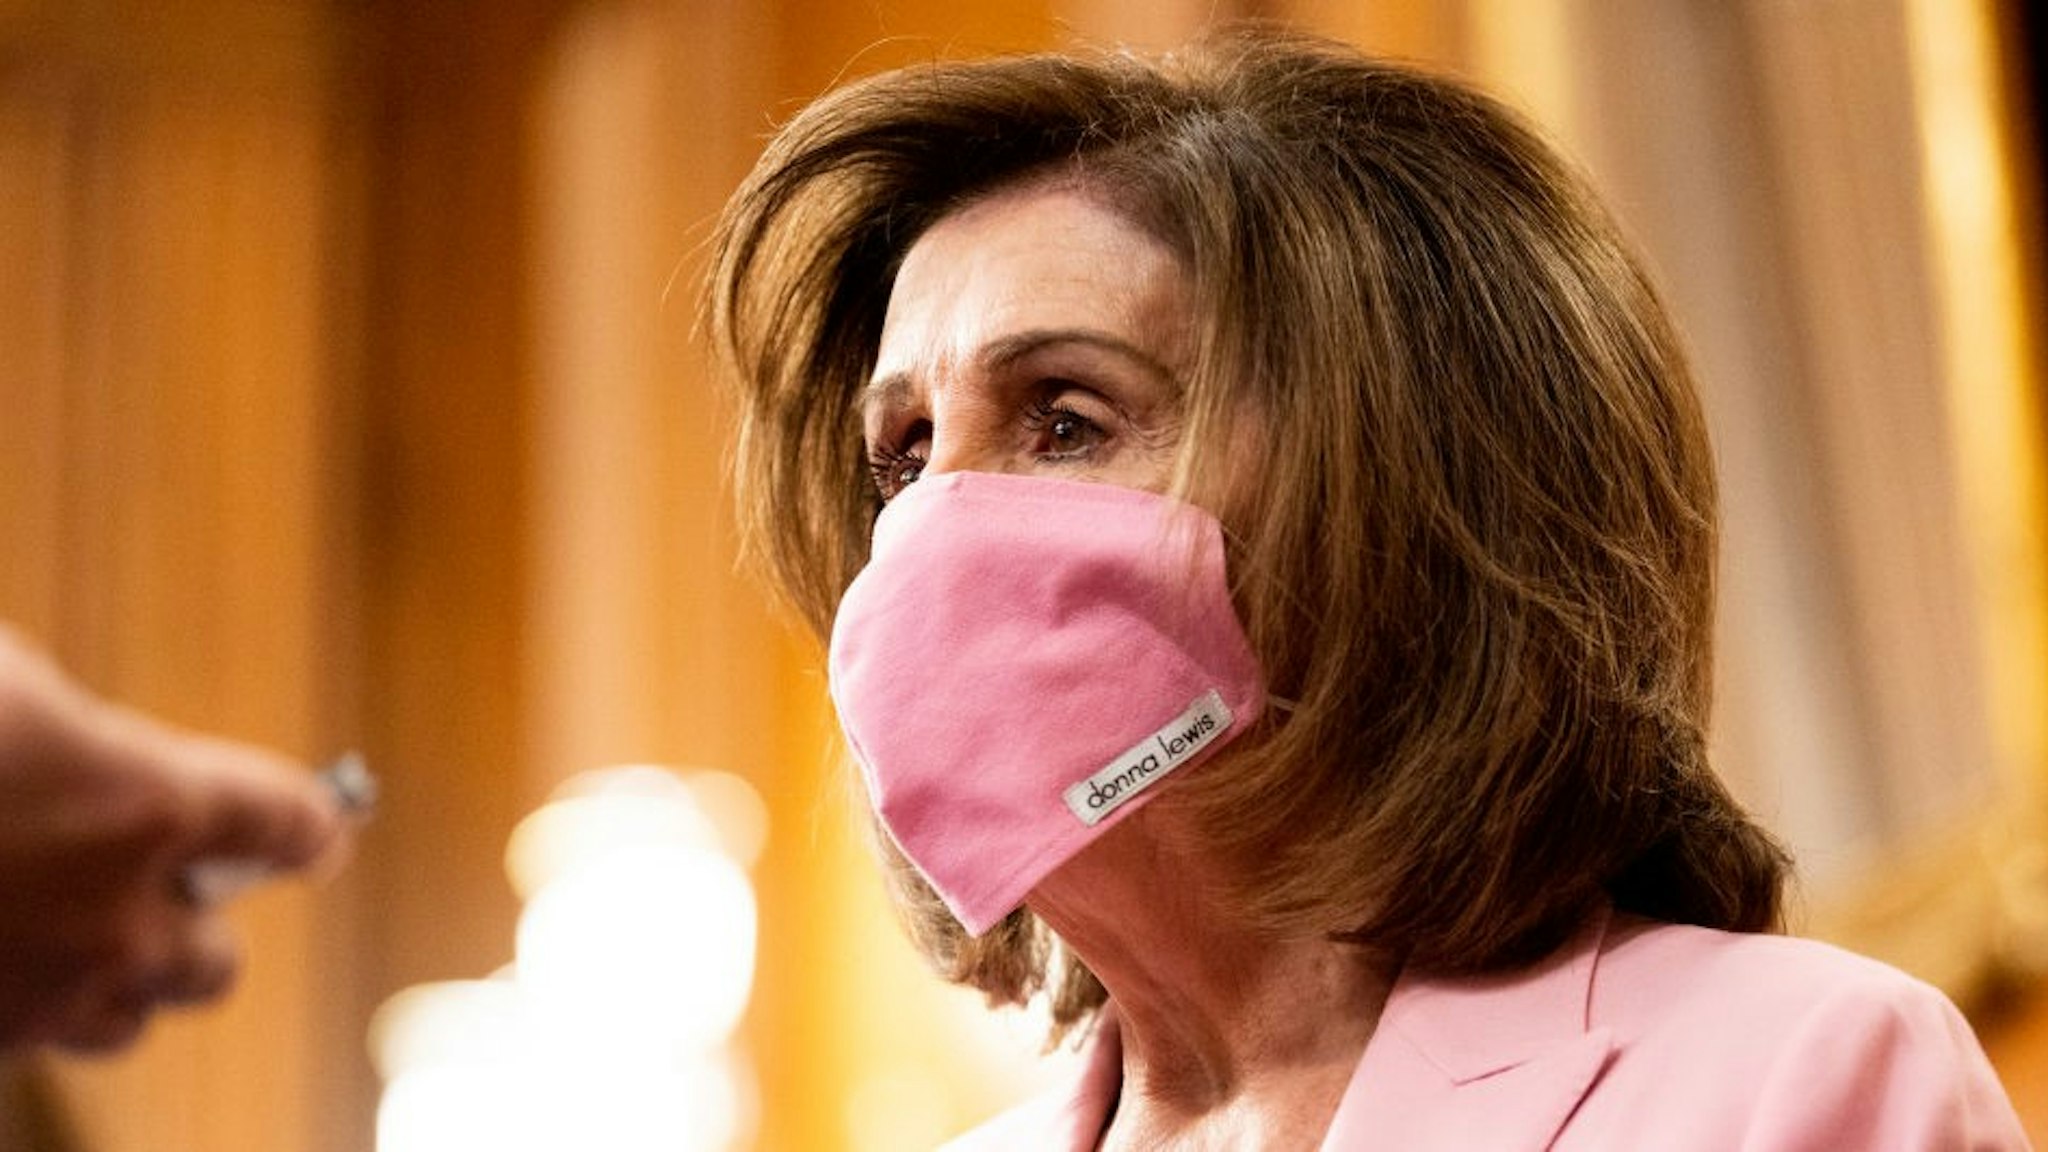 WASHINGTON, UNITED STATES - MAY 05, 2020: U.S. Representative, Nancy Pelosi (D-CA) wearing a face mask as a precaution against the spread of covid 19 virus at the ceremonial swearing in of Representative Elect Kweisi Mfume (D-MD).- PHOTOGRAPH BY Michael Brochstein / Echoes Wire/ Barcroft Studios / Future Publishing (Photo credit should read